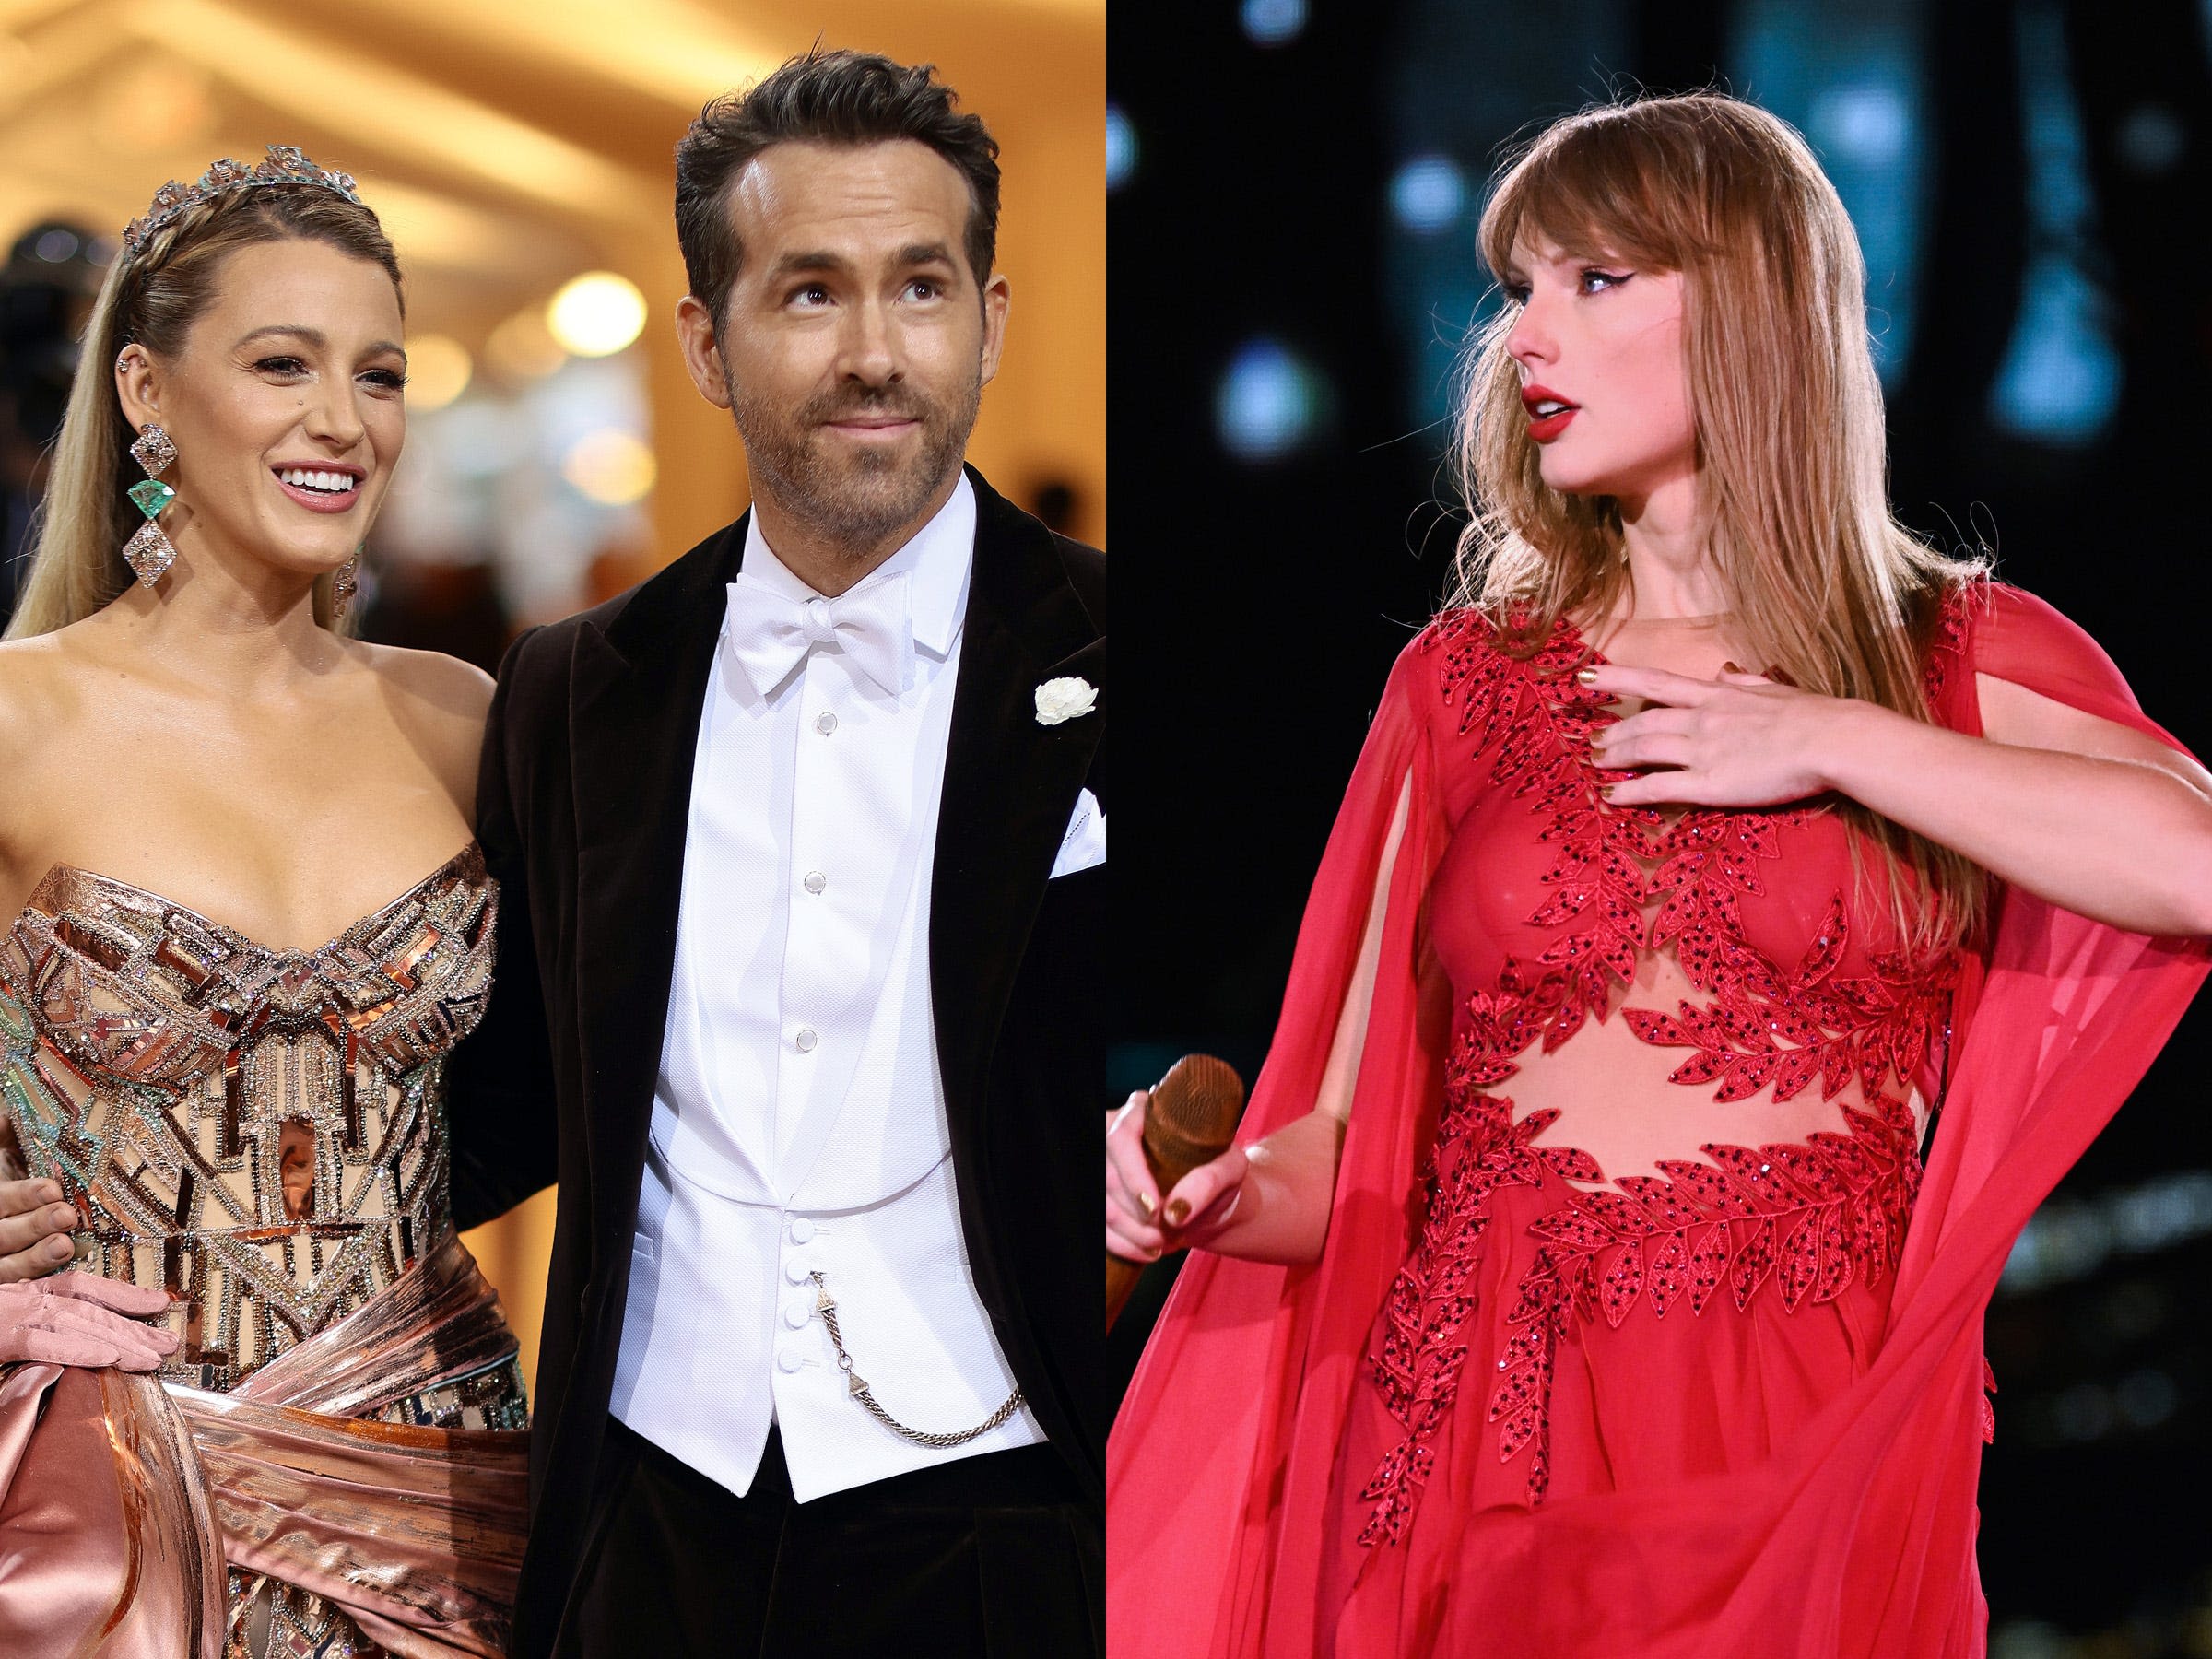 Taylor Swift subtly let slip she's the godmother of Ryan Reynolds and Blake Lively's kids while praising the new 'Deadpool' movie